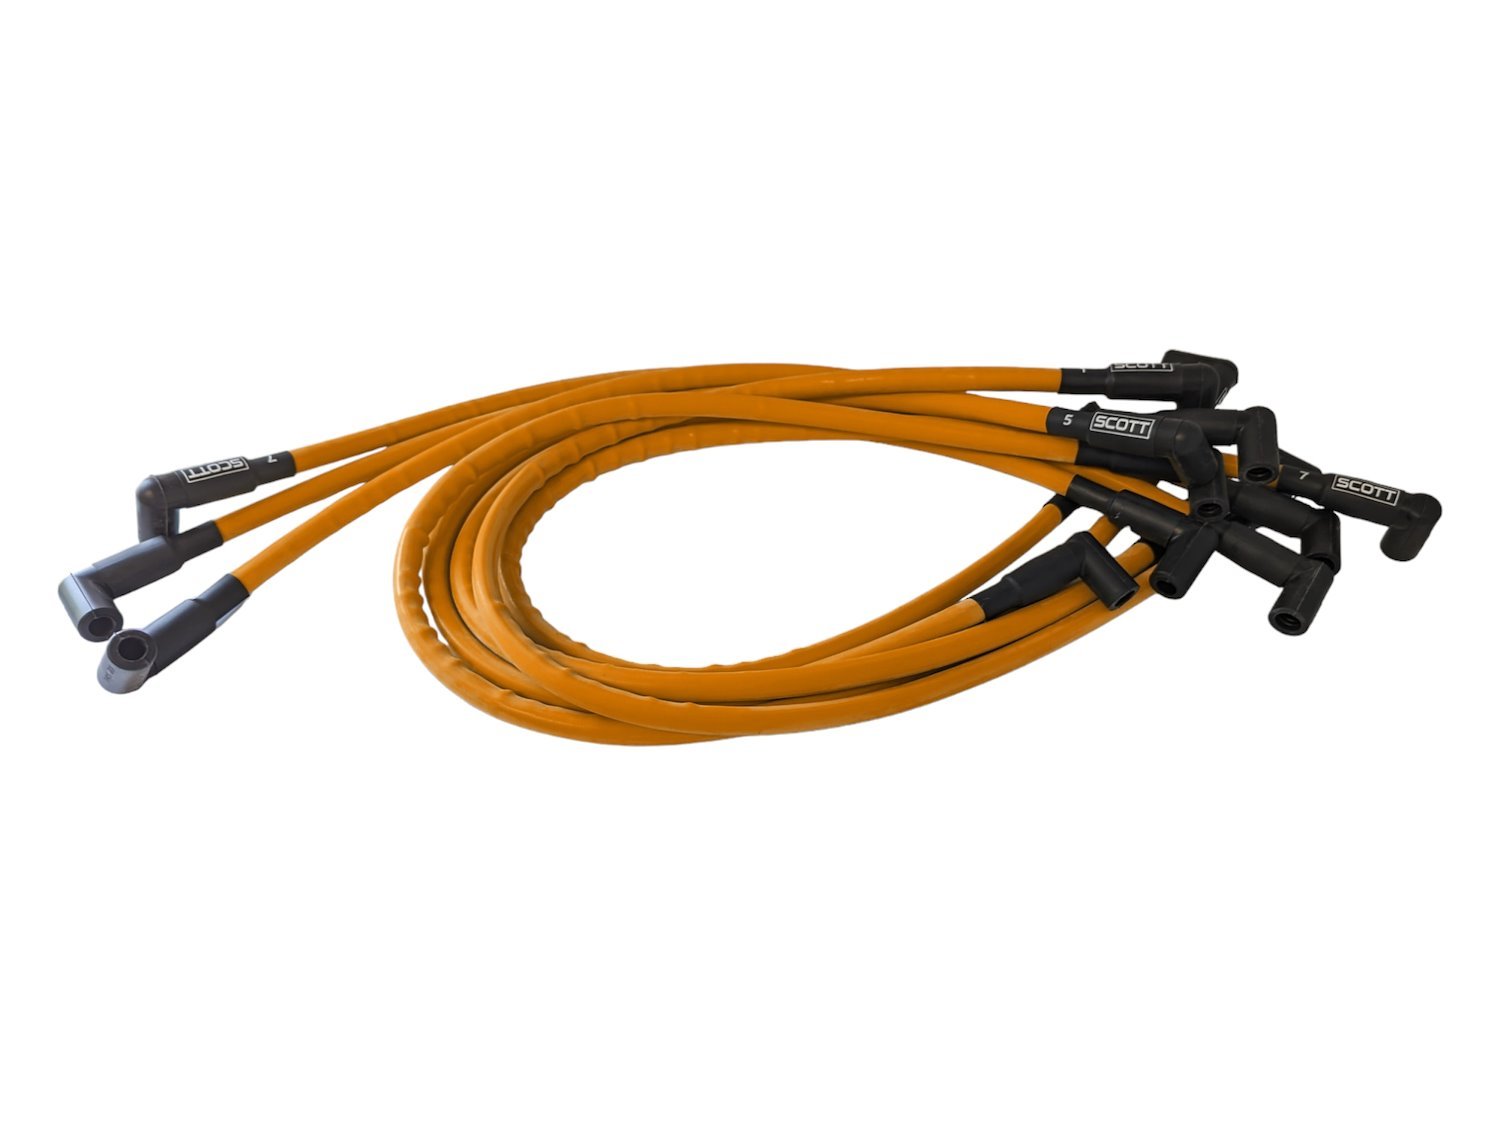 SPW-CH-435-5 High-Performance Silicone-Sleeved Spark Plug Wire Set for Small Block Chevy, Around Front [Orange]